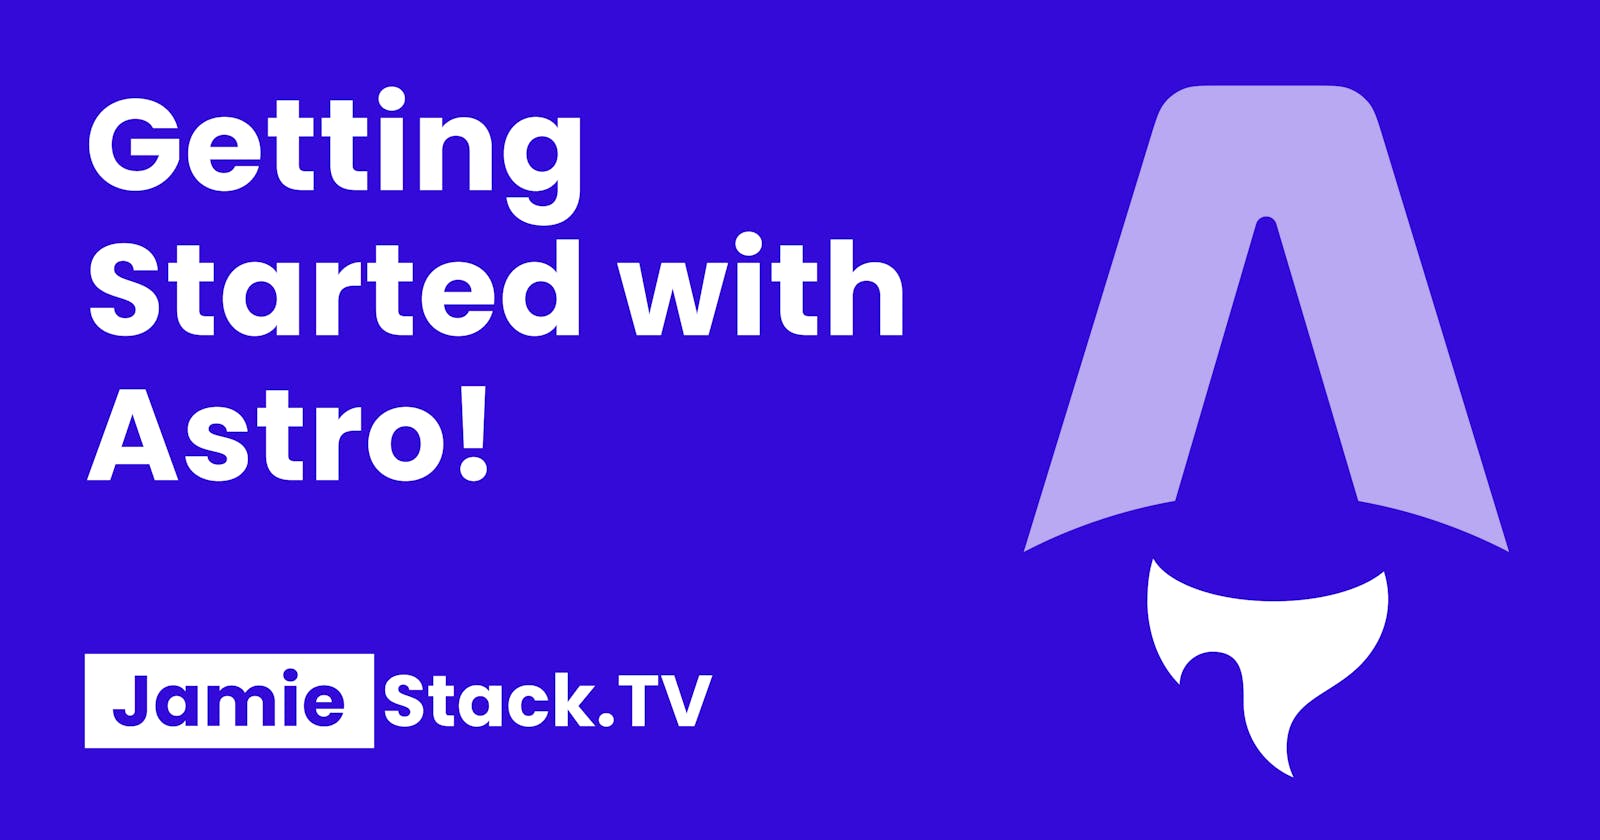 Reaching New Heights with Astro: Getting Started